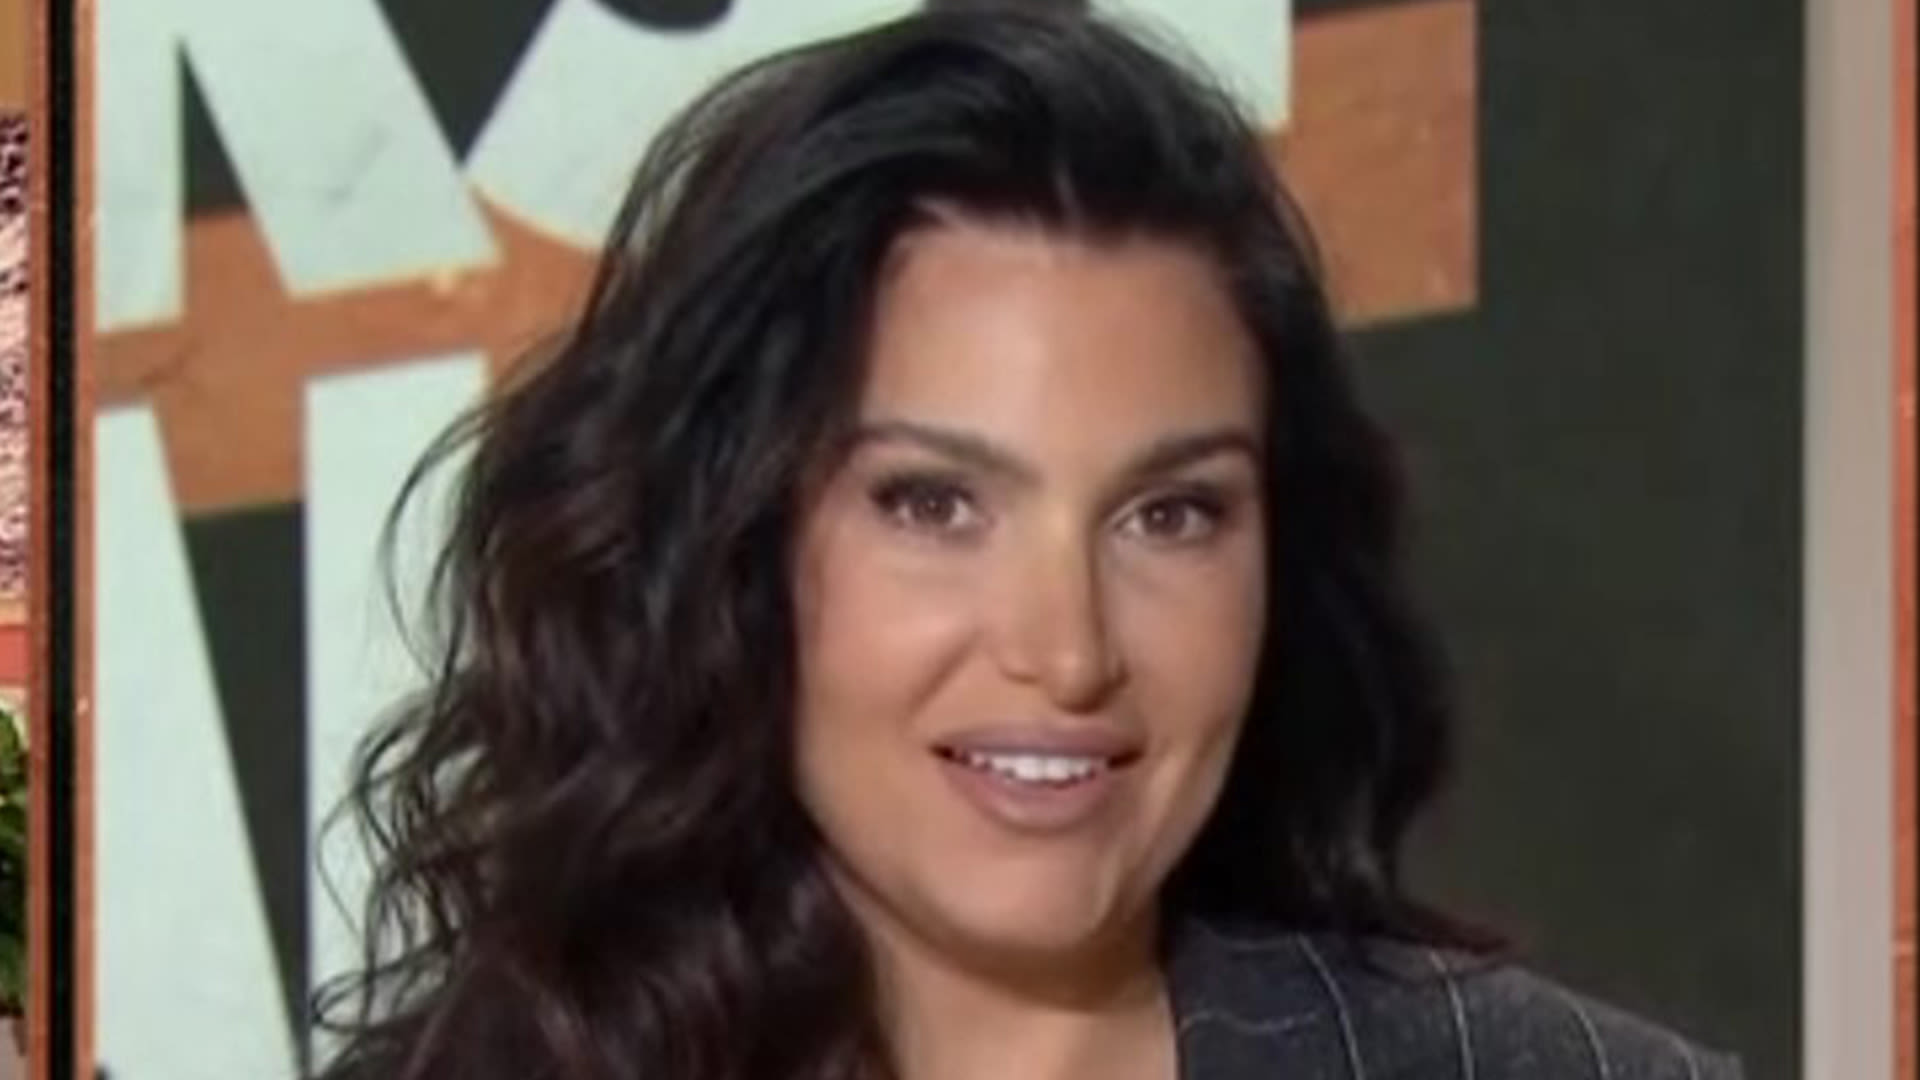 'Serious FOMO right now', says Molly Qerim as First Take flies out guest to LA